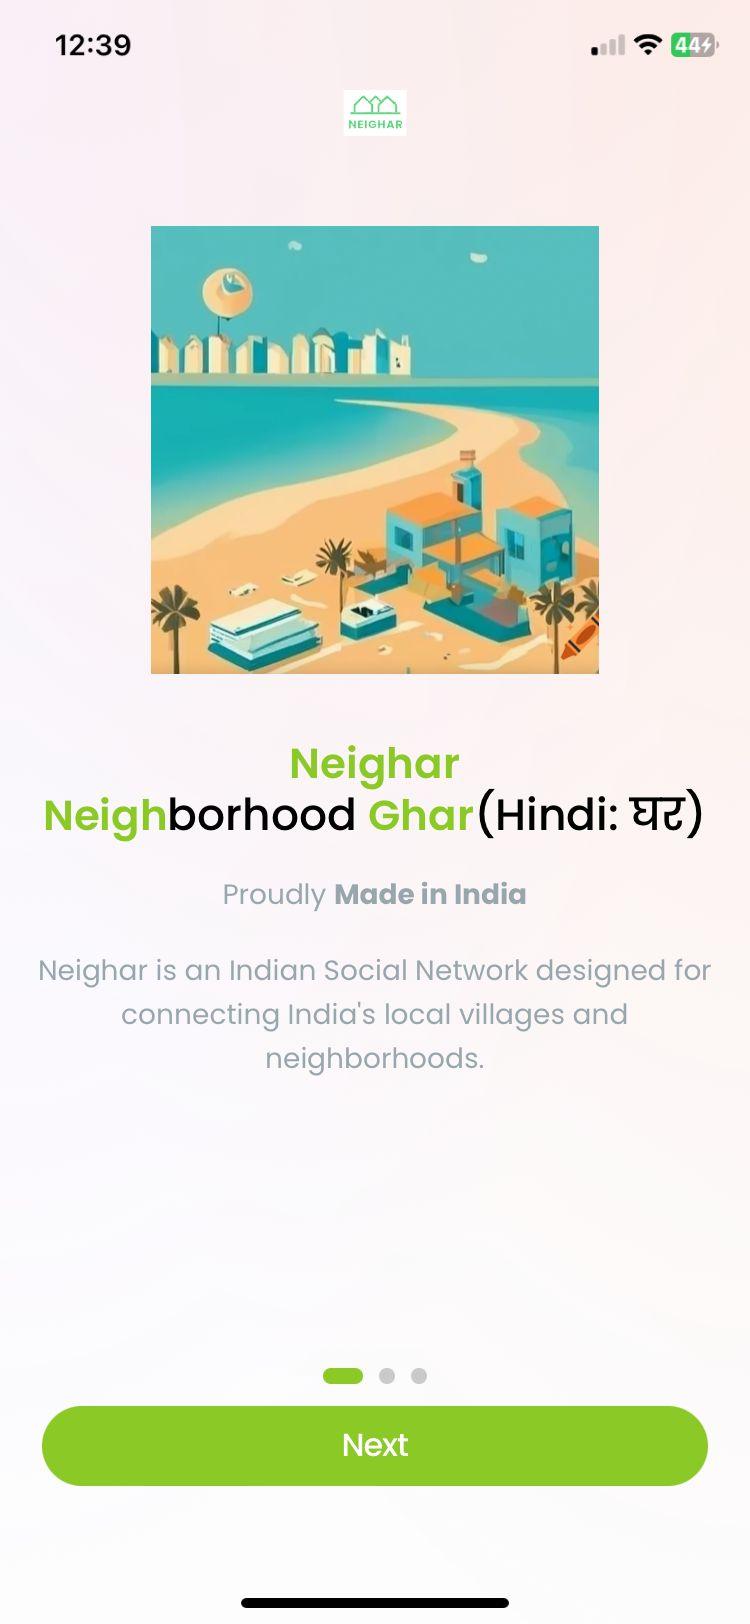 Neighar, the Indian neighborhood and Community App, has unveiled the incorporation of generative AI technologies across its platfo